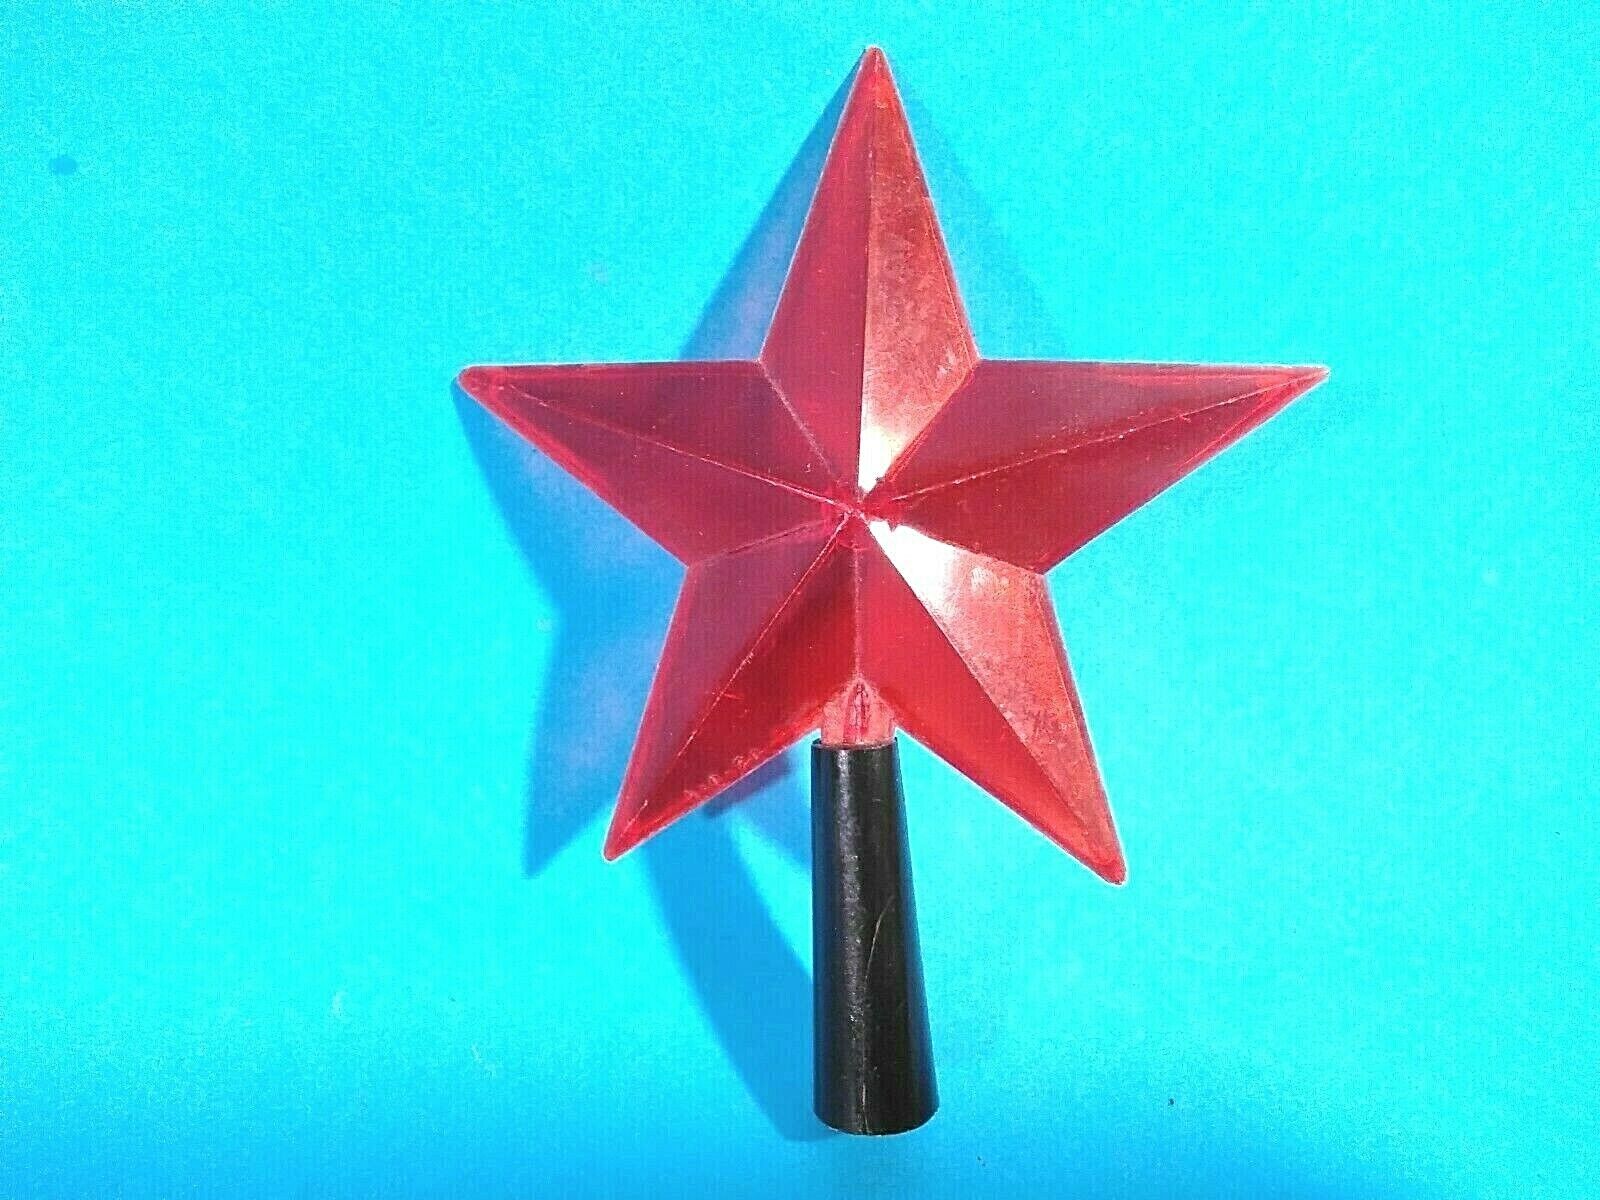 vitage Soviet Russian CHRISTMAS Tree Topper STAR toy ORNAMENTS 70s USSR